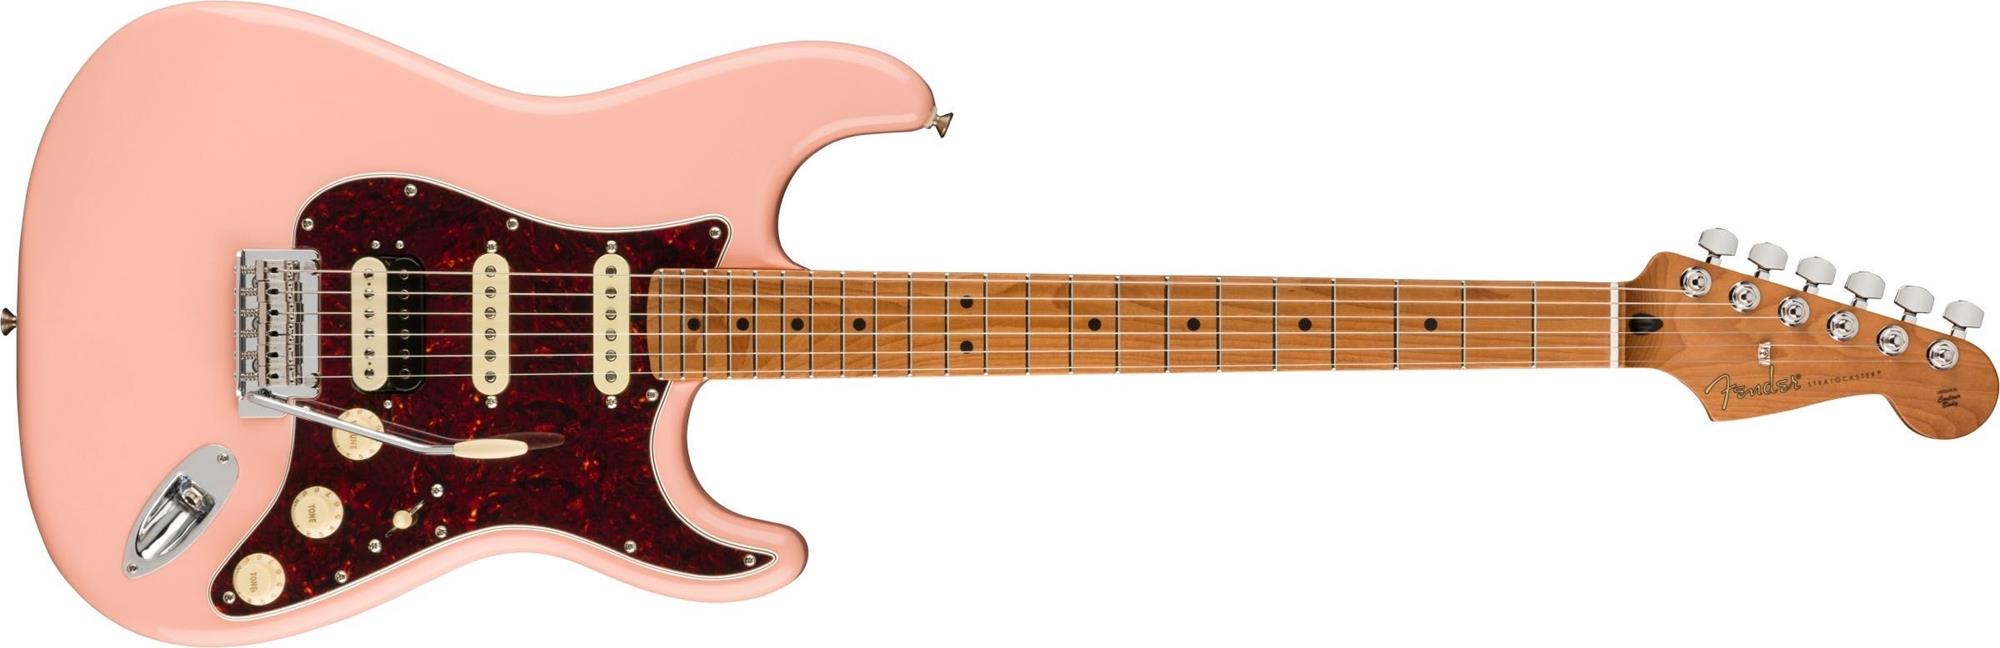 FENDER DELUXE PLAYER STRATOCASTER HSS ROASTED MN SHELL PINK 0144522556 - Chitarre Chitarre - Elettriche